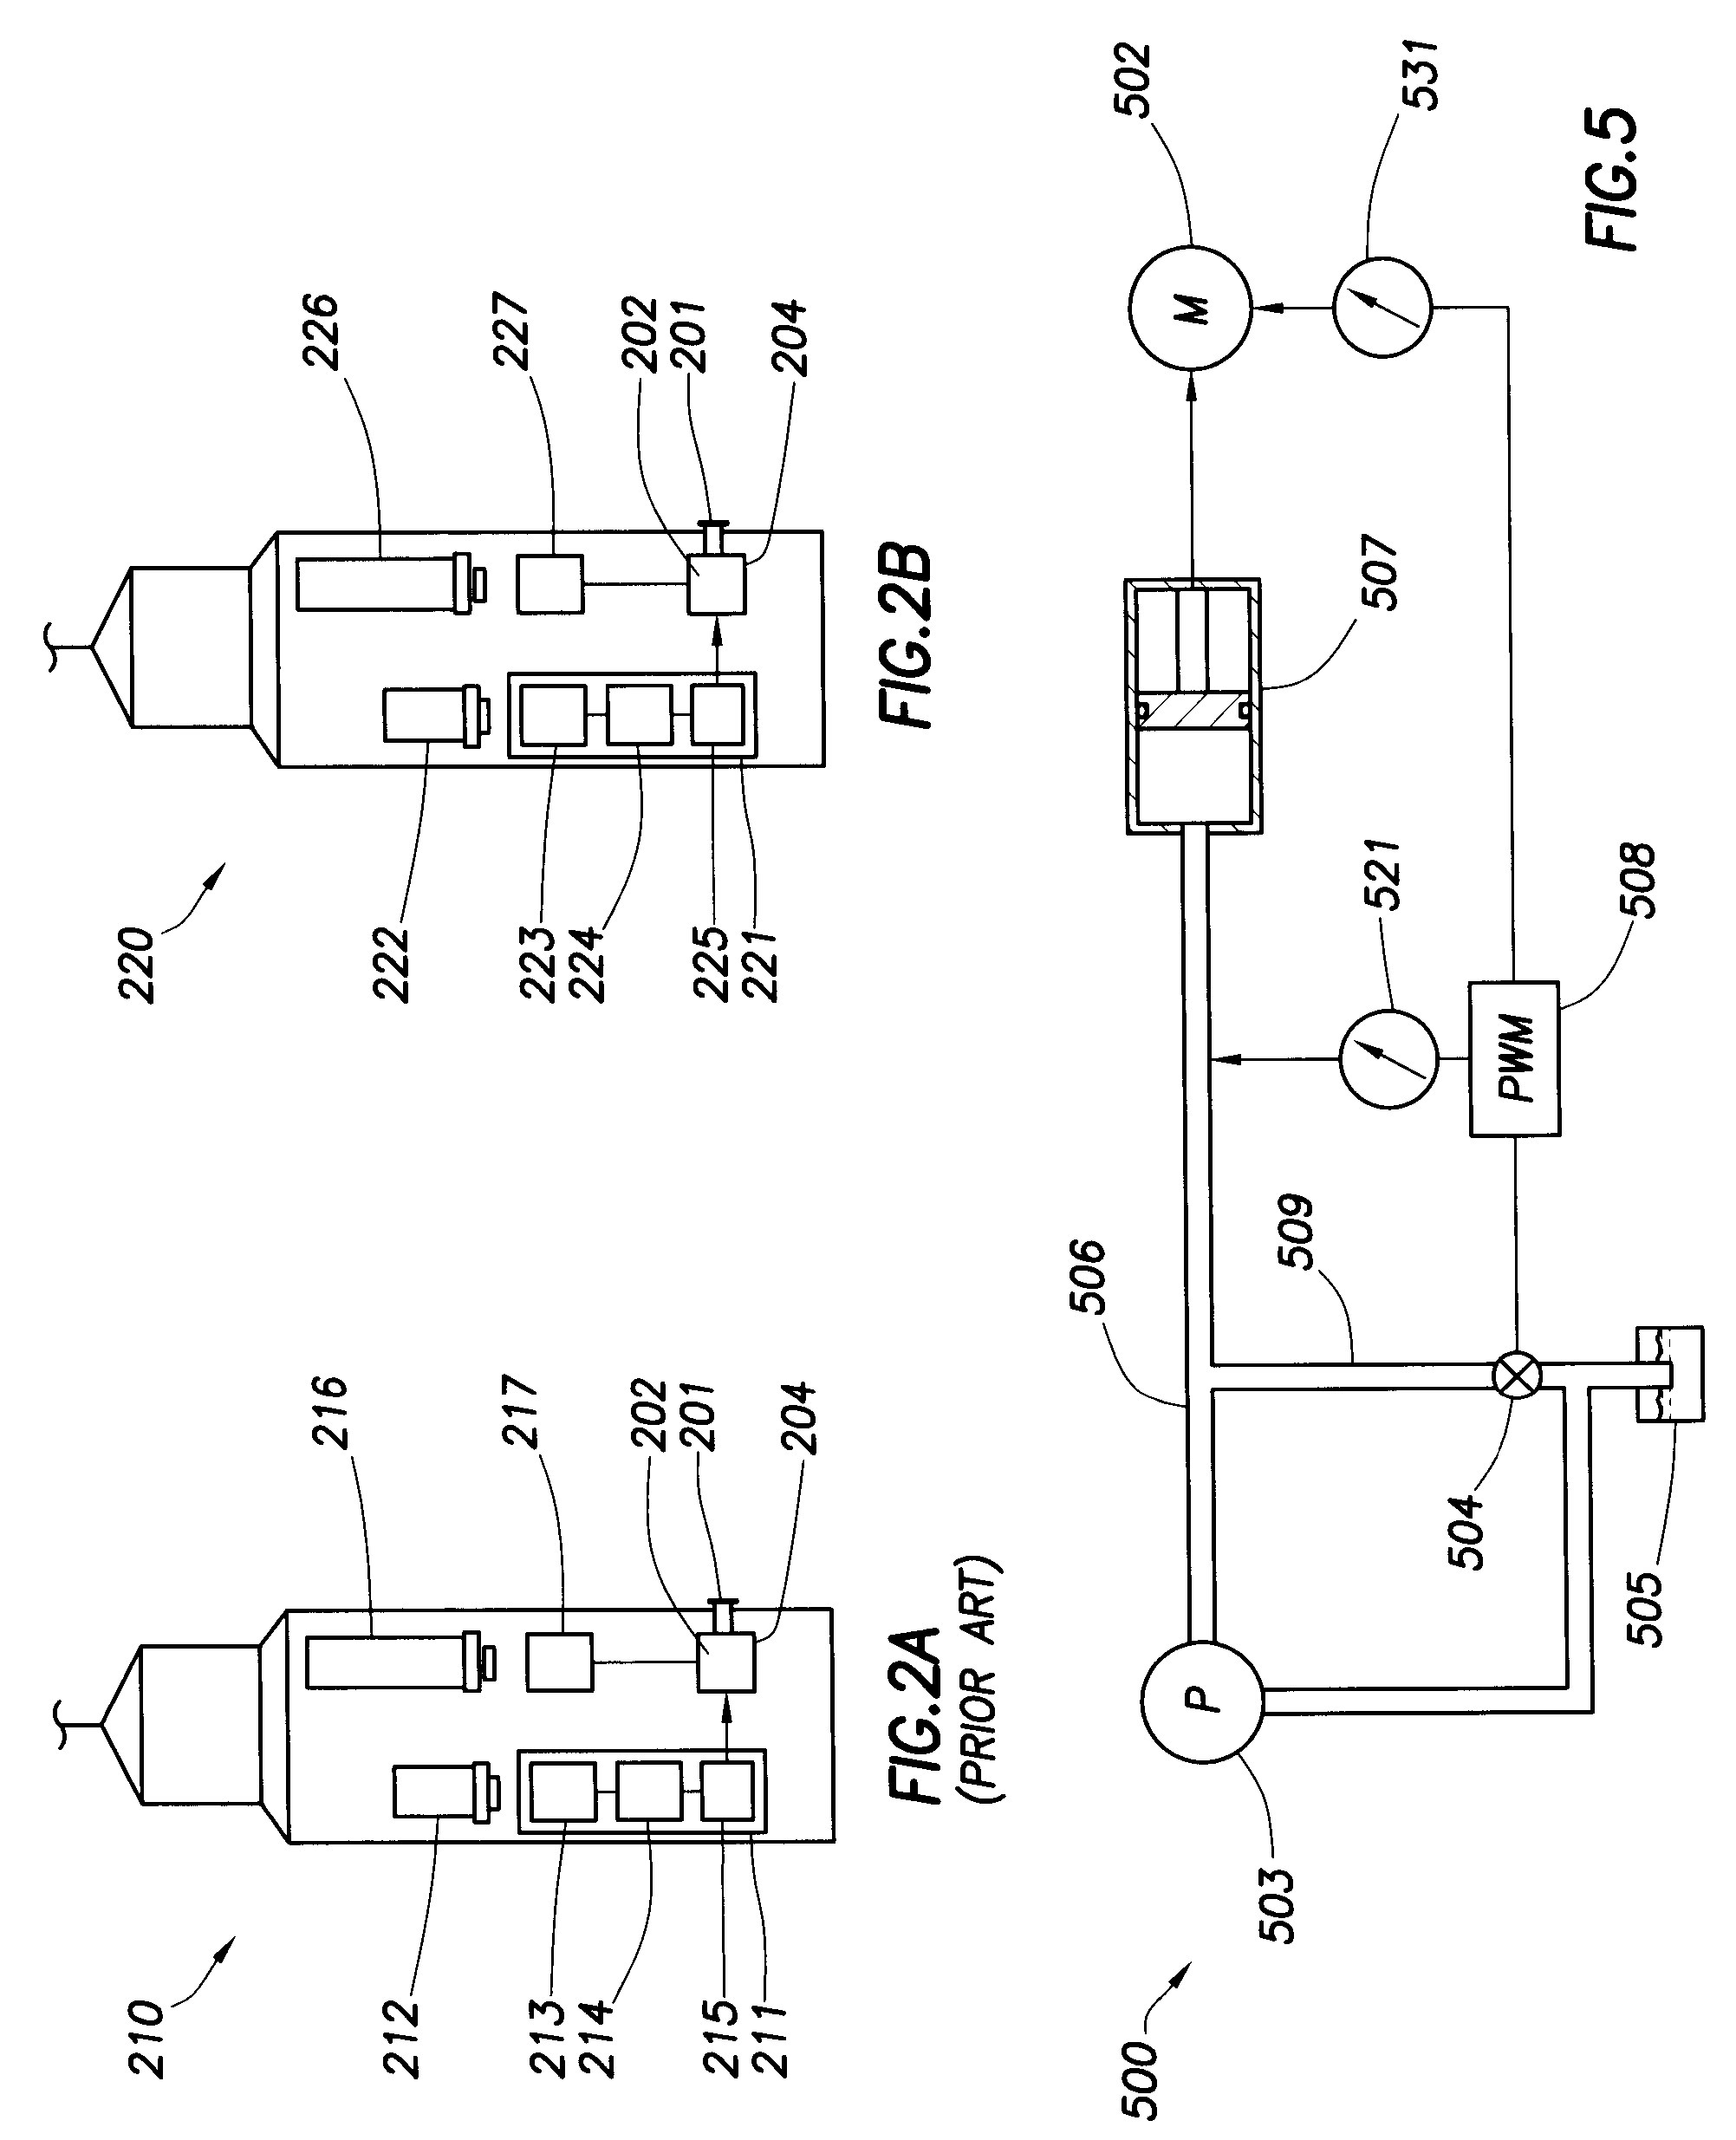 Downhole formation testing tool